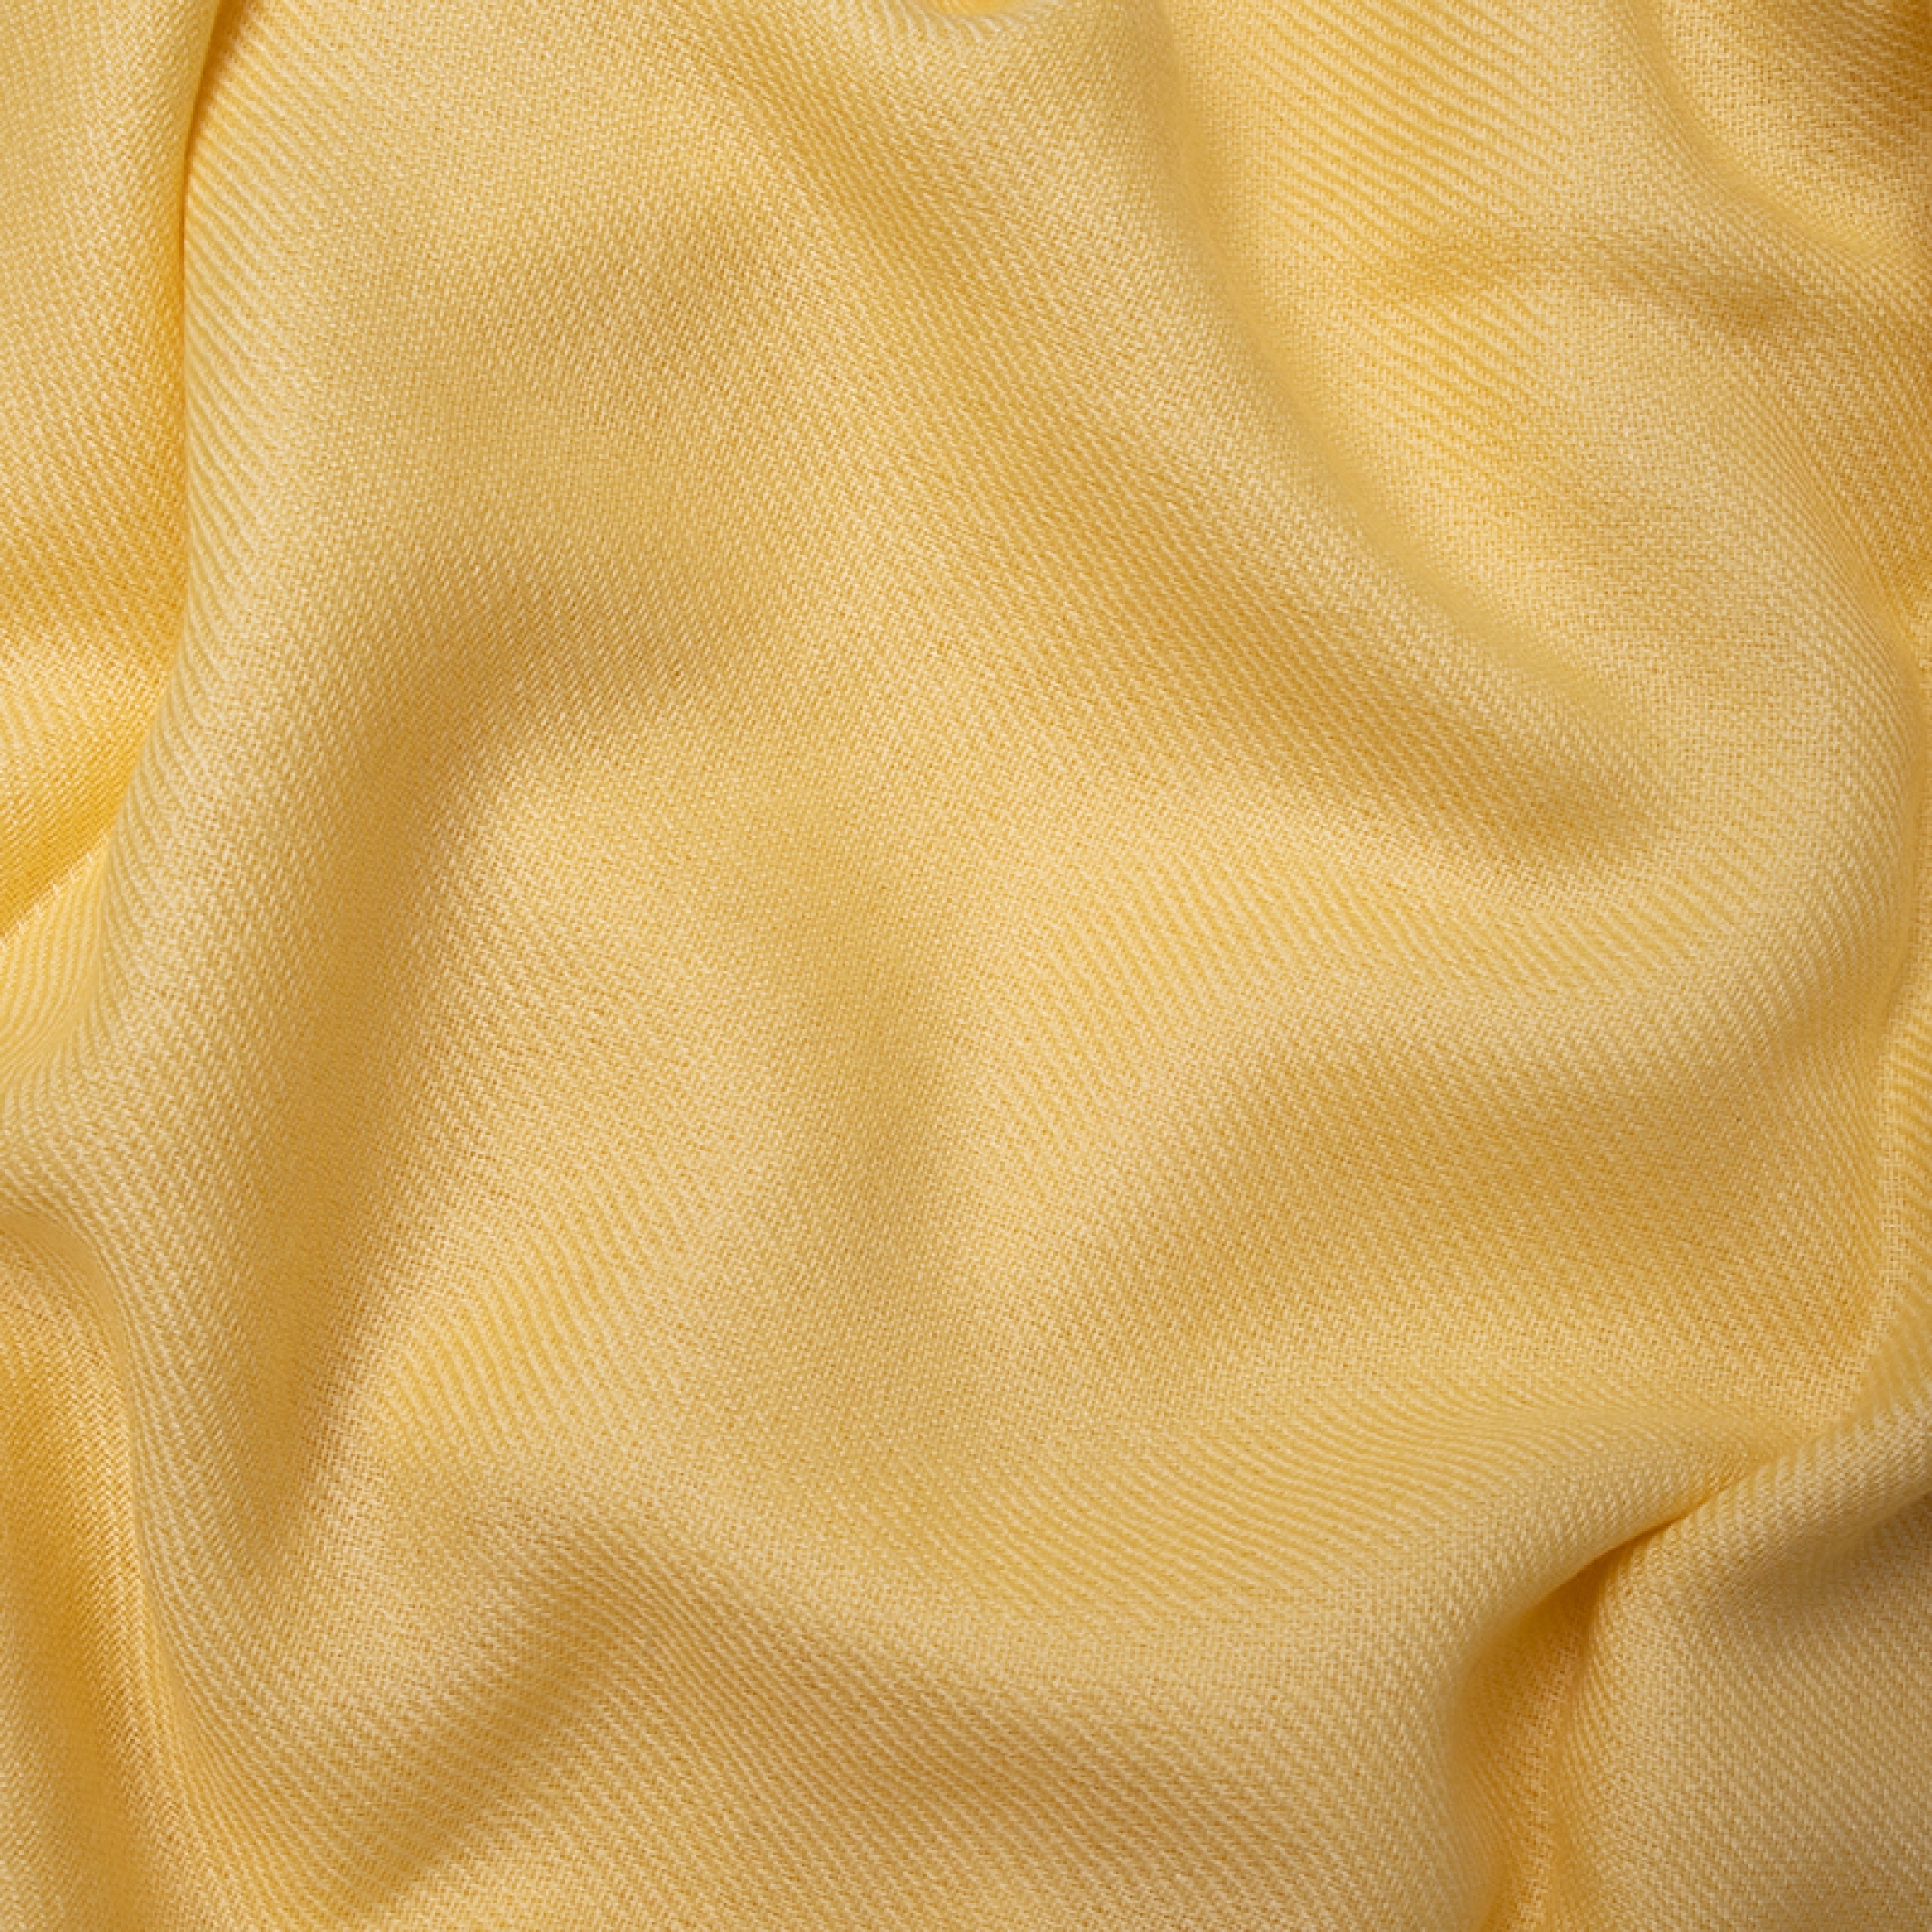 Cashmere accessories cocooning toodoo plain m 180 x 220 mellow yellow 180 x 220 cm